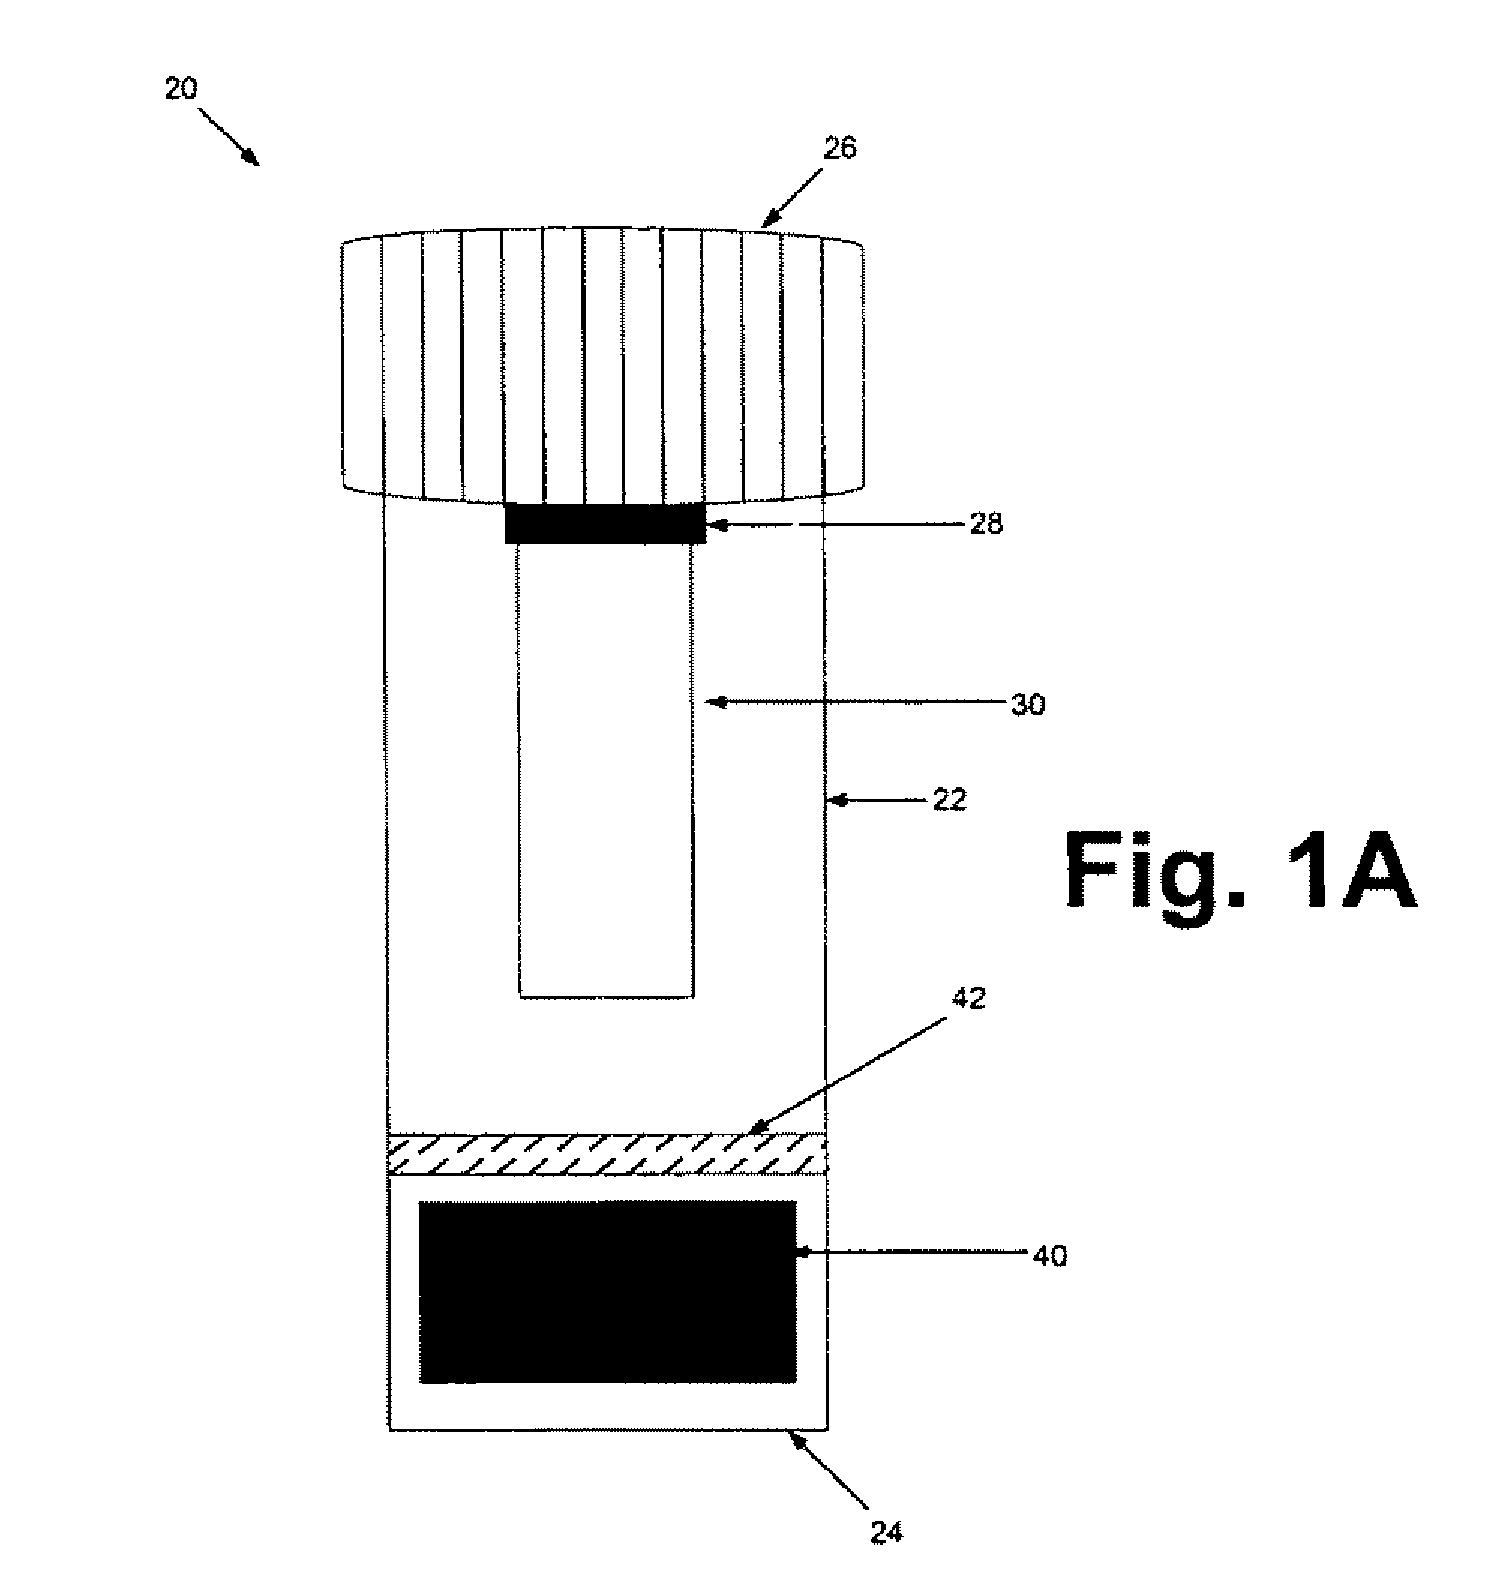 Devices and Methods for Collection, Storage and Transportation of Biological Specimens